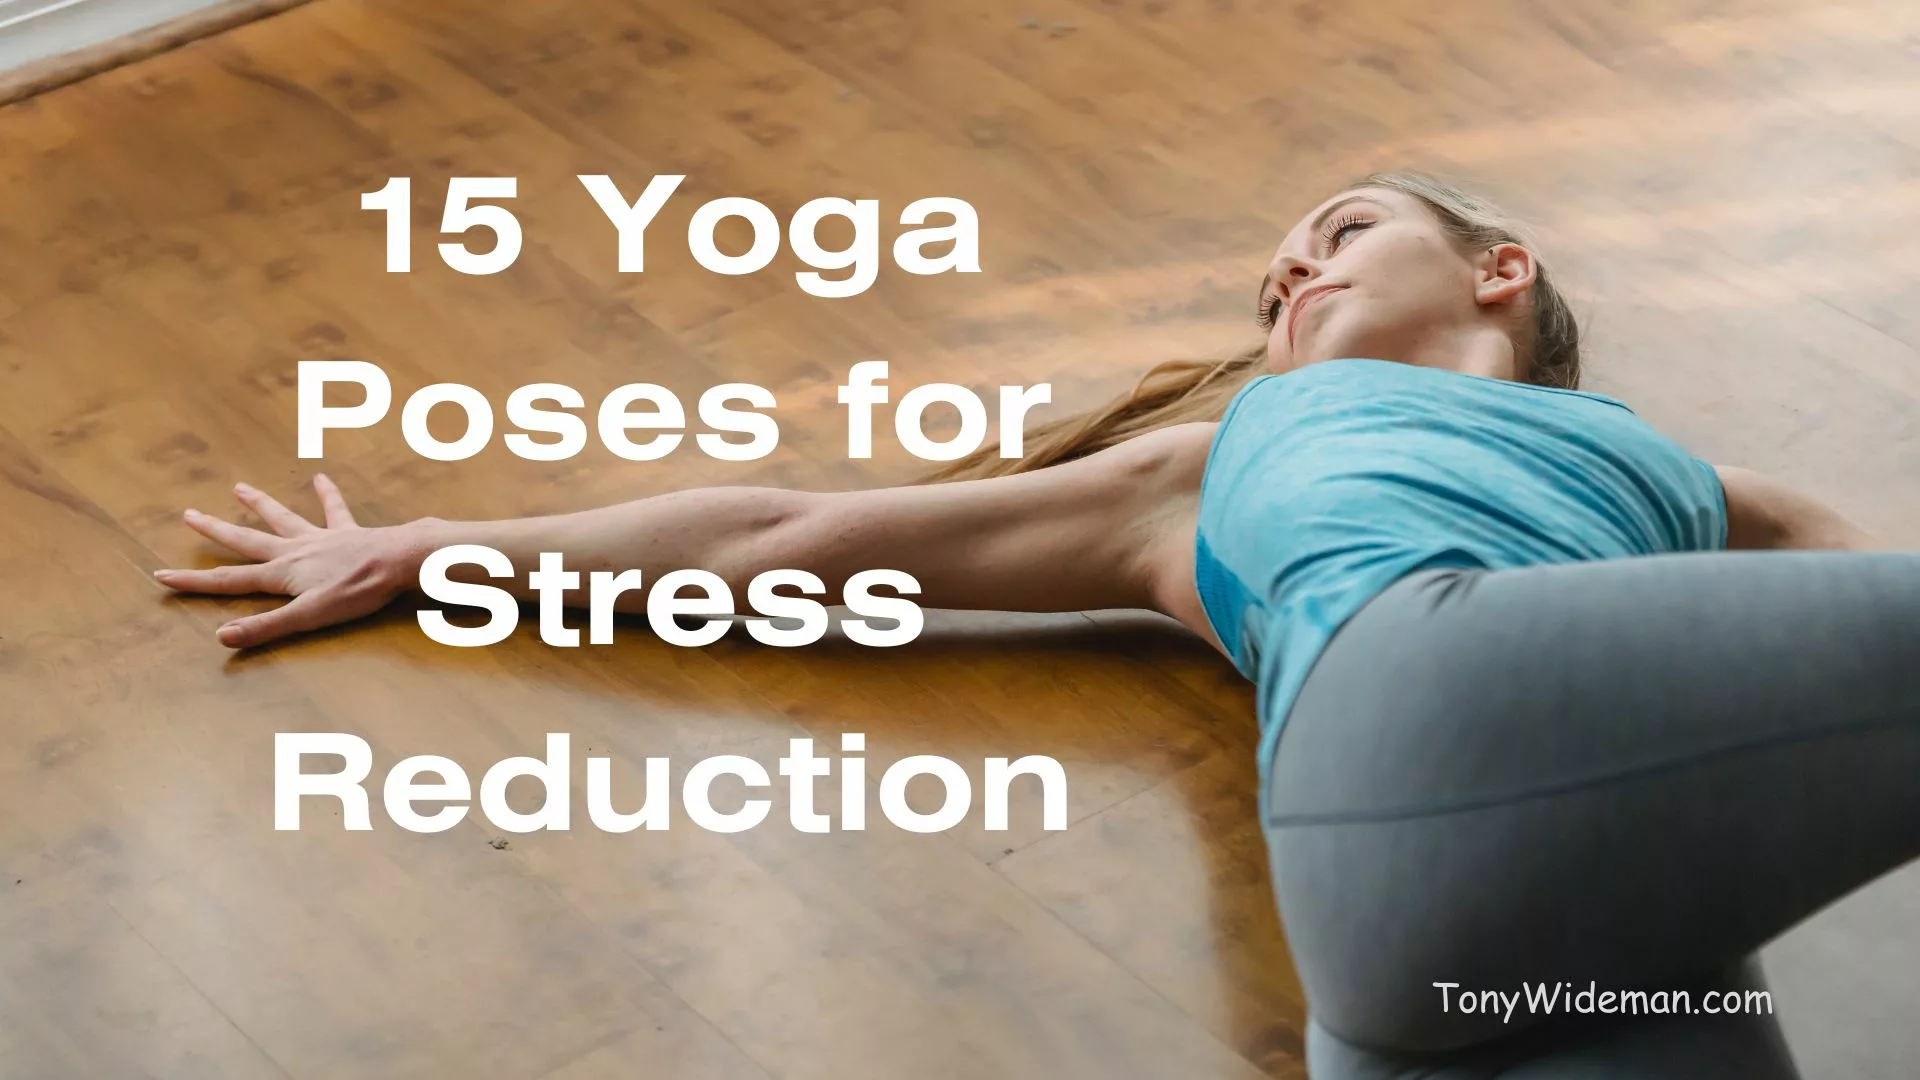 15 Yoga Poses for Stress Reduction